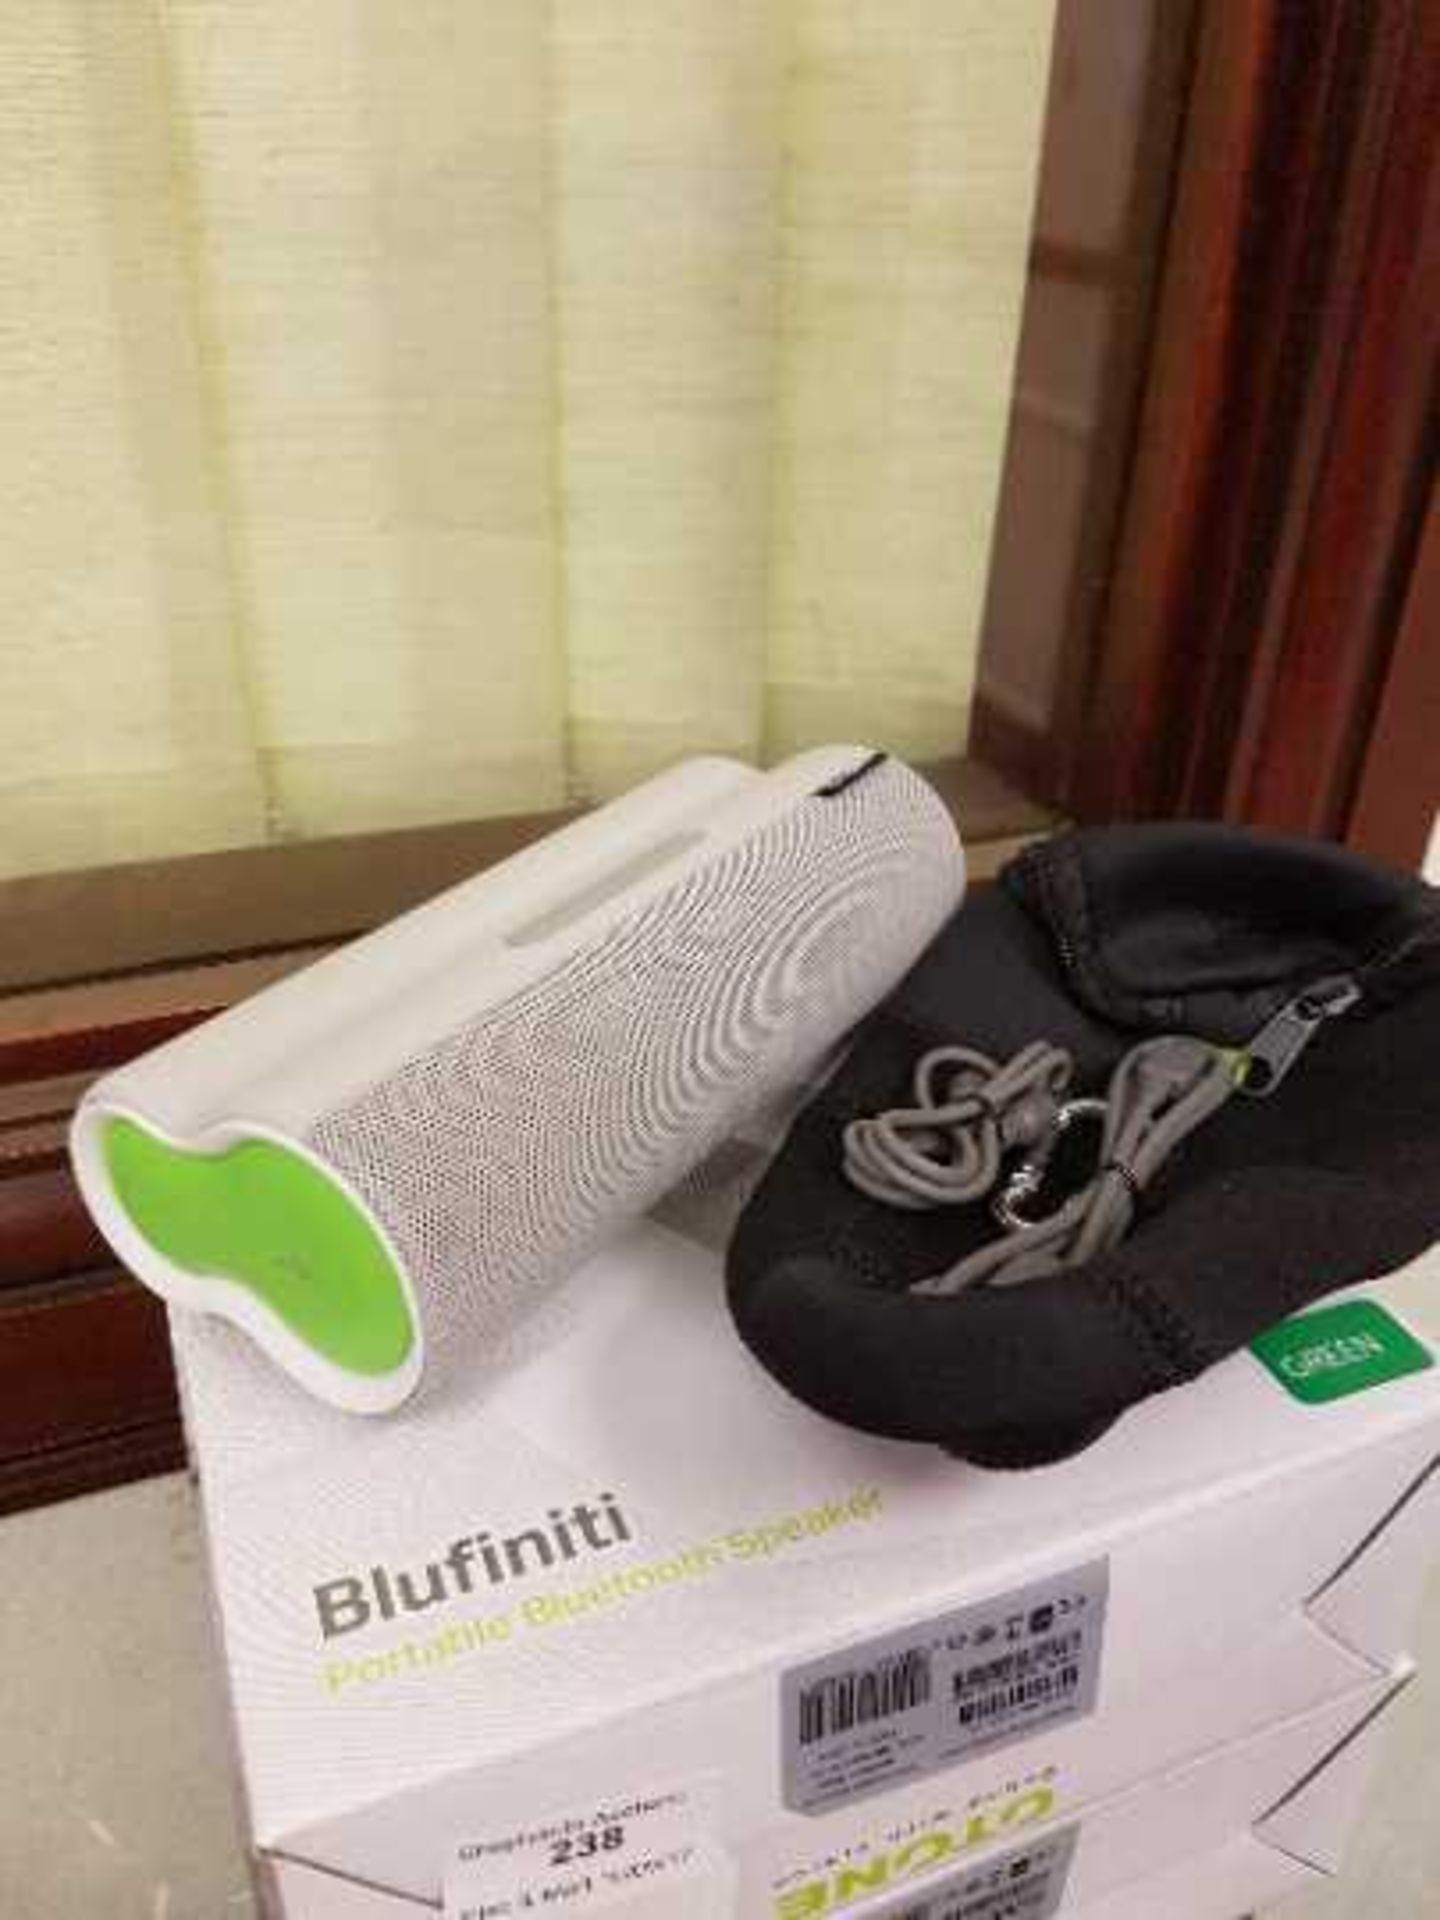 OTONE Blufiniti potable Bluetooth speaker, new and boxed RRP £59.99, Green - Image 2 of 2